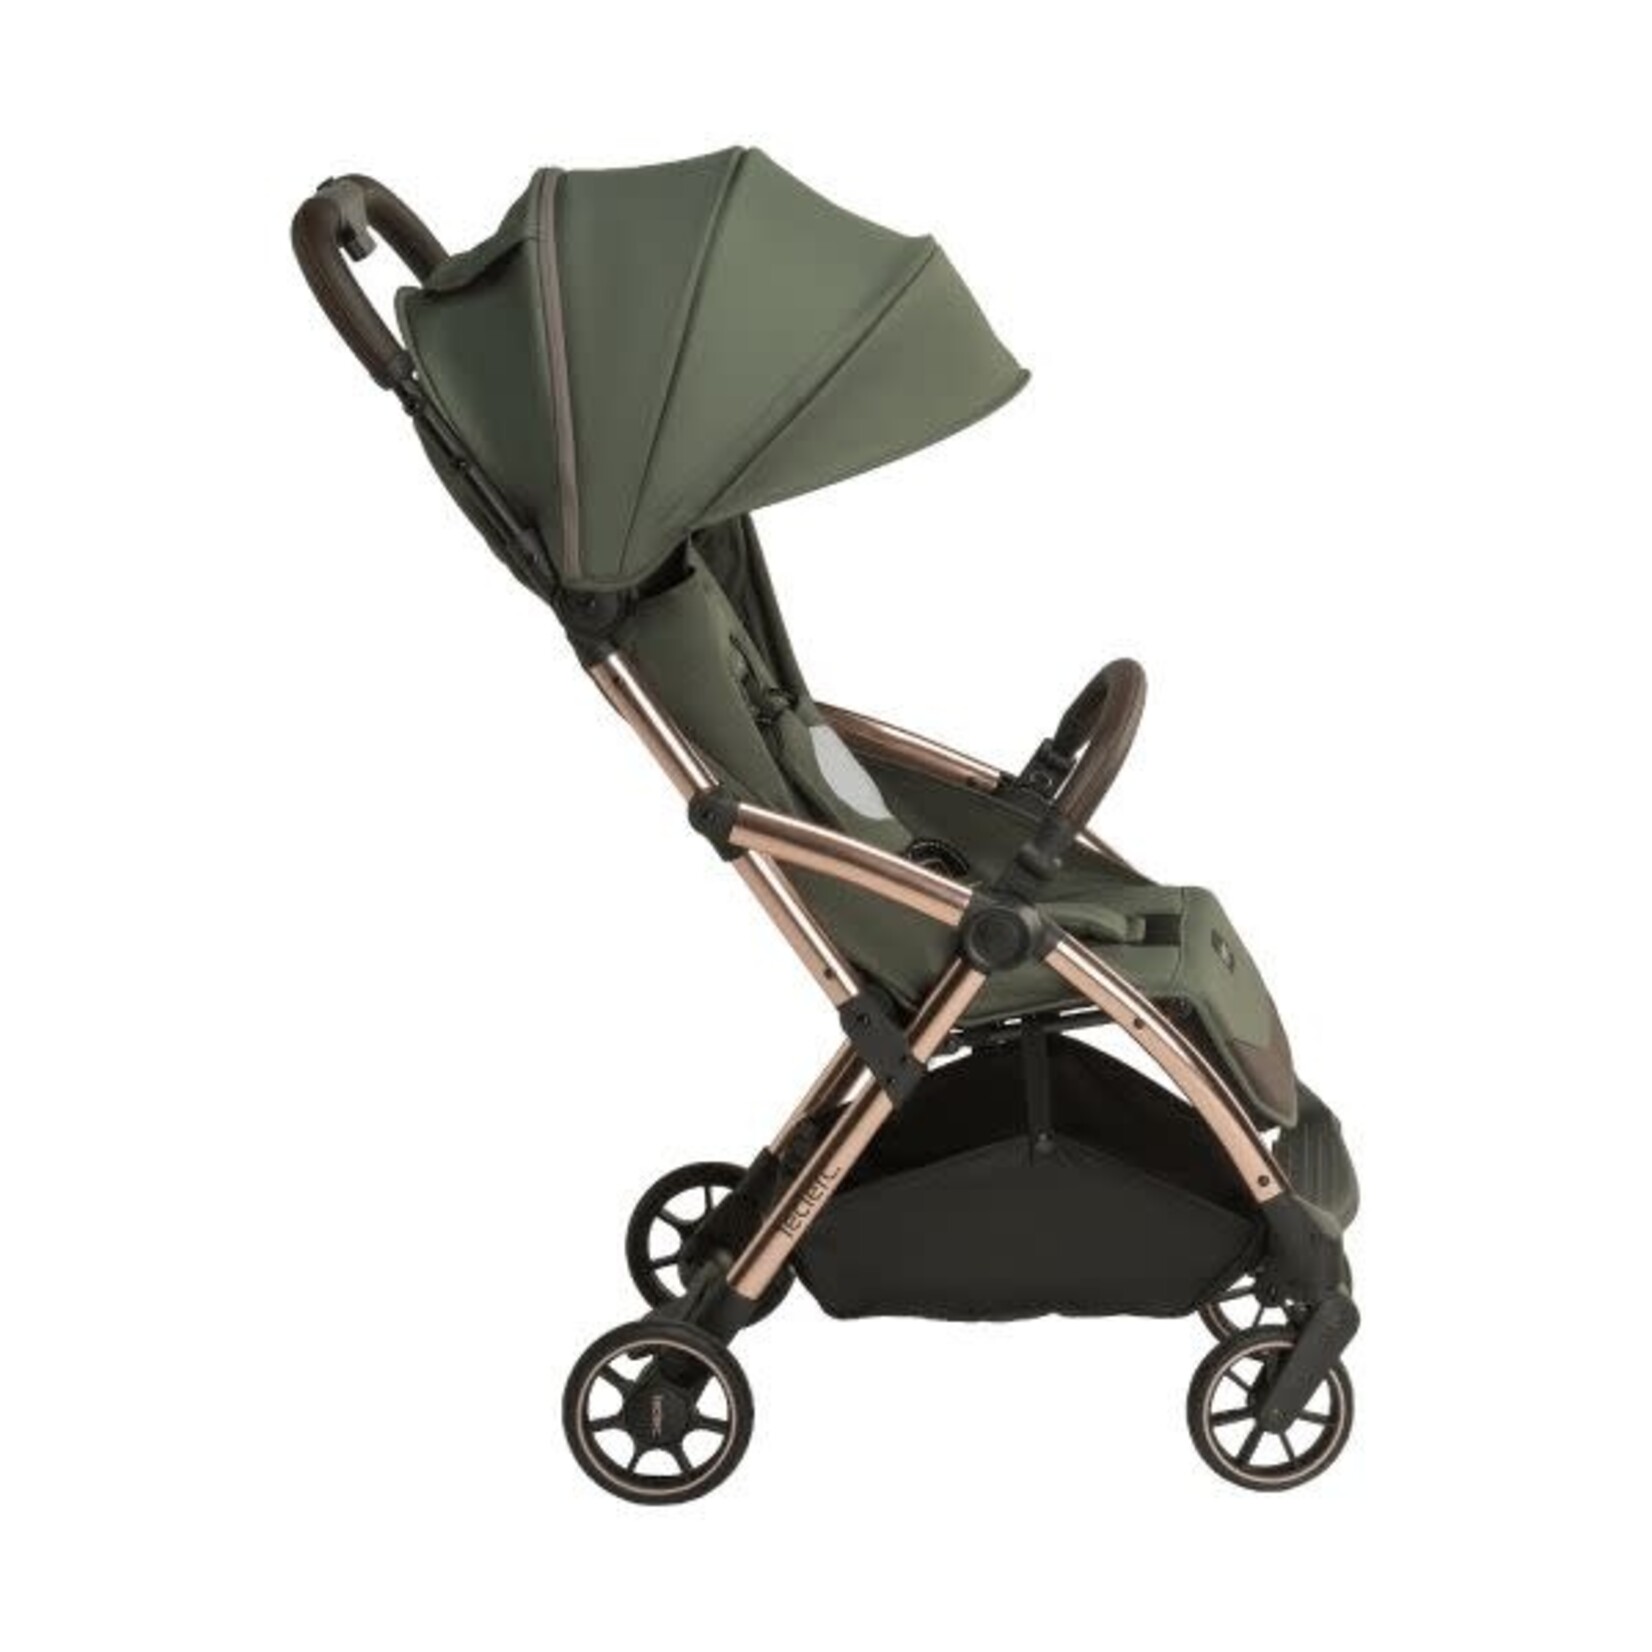 Leclerc Baby Leclerc Baby - Influencer Army Green met MAGIC FOLD systeem!